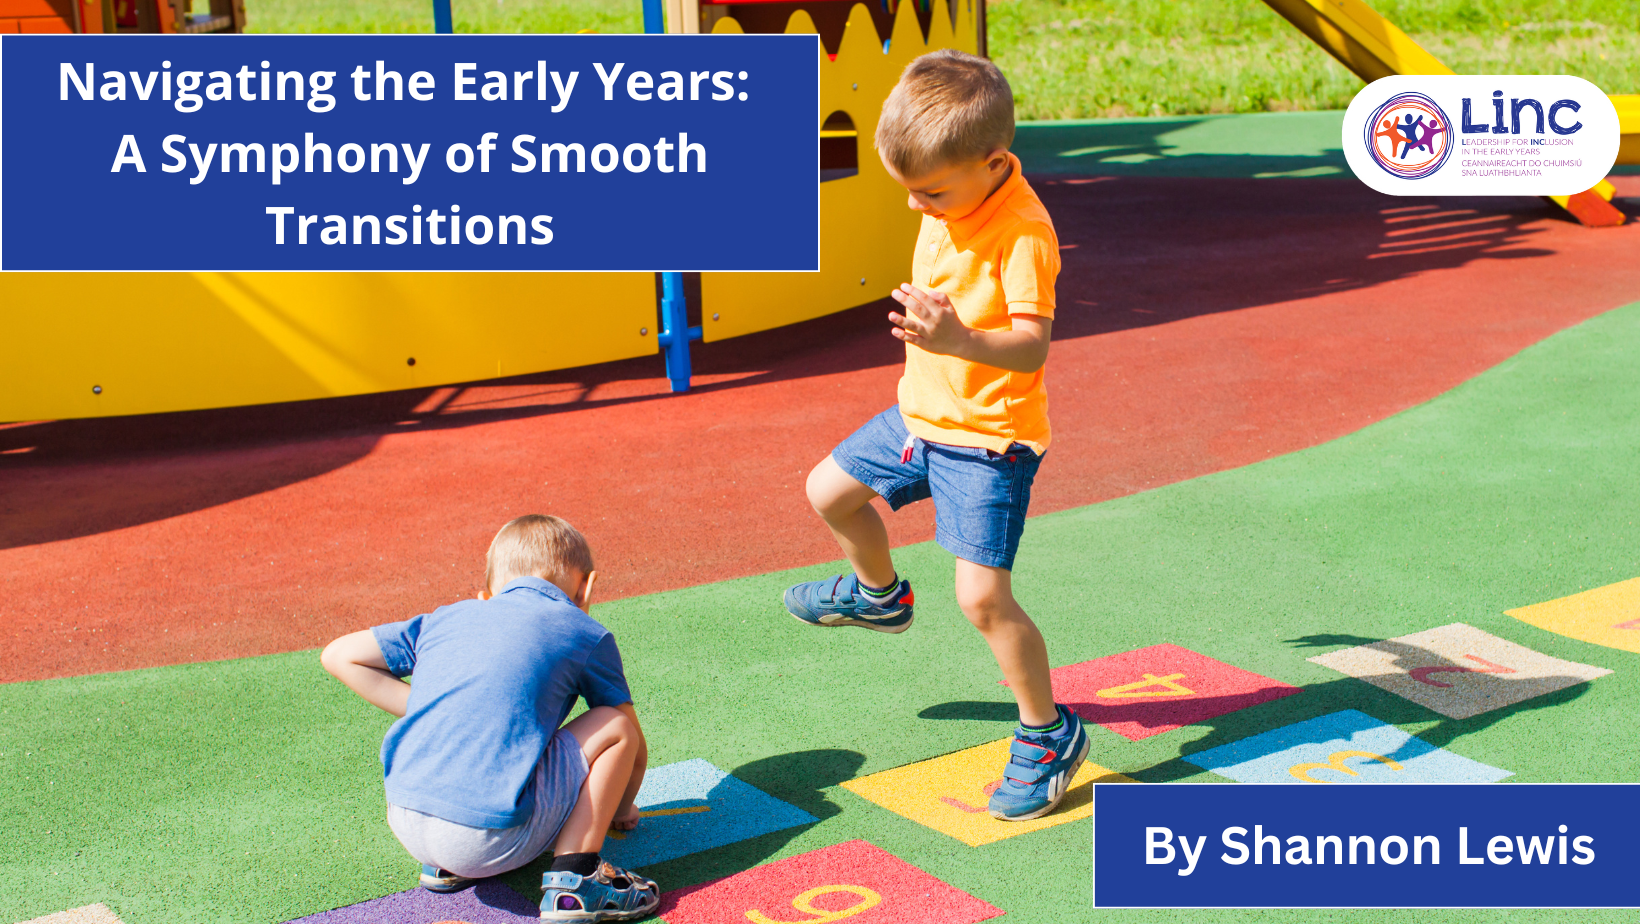 Navigating the Early Years: A Symphony of Smooth Transitions